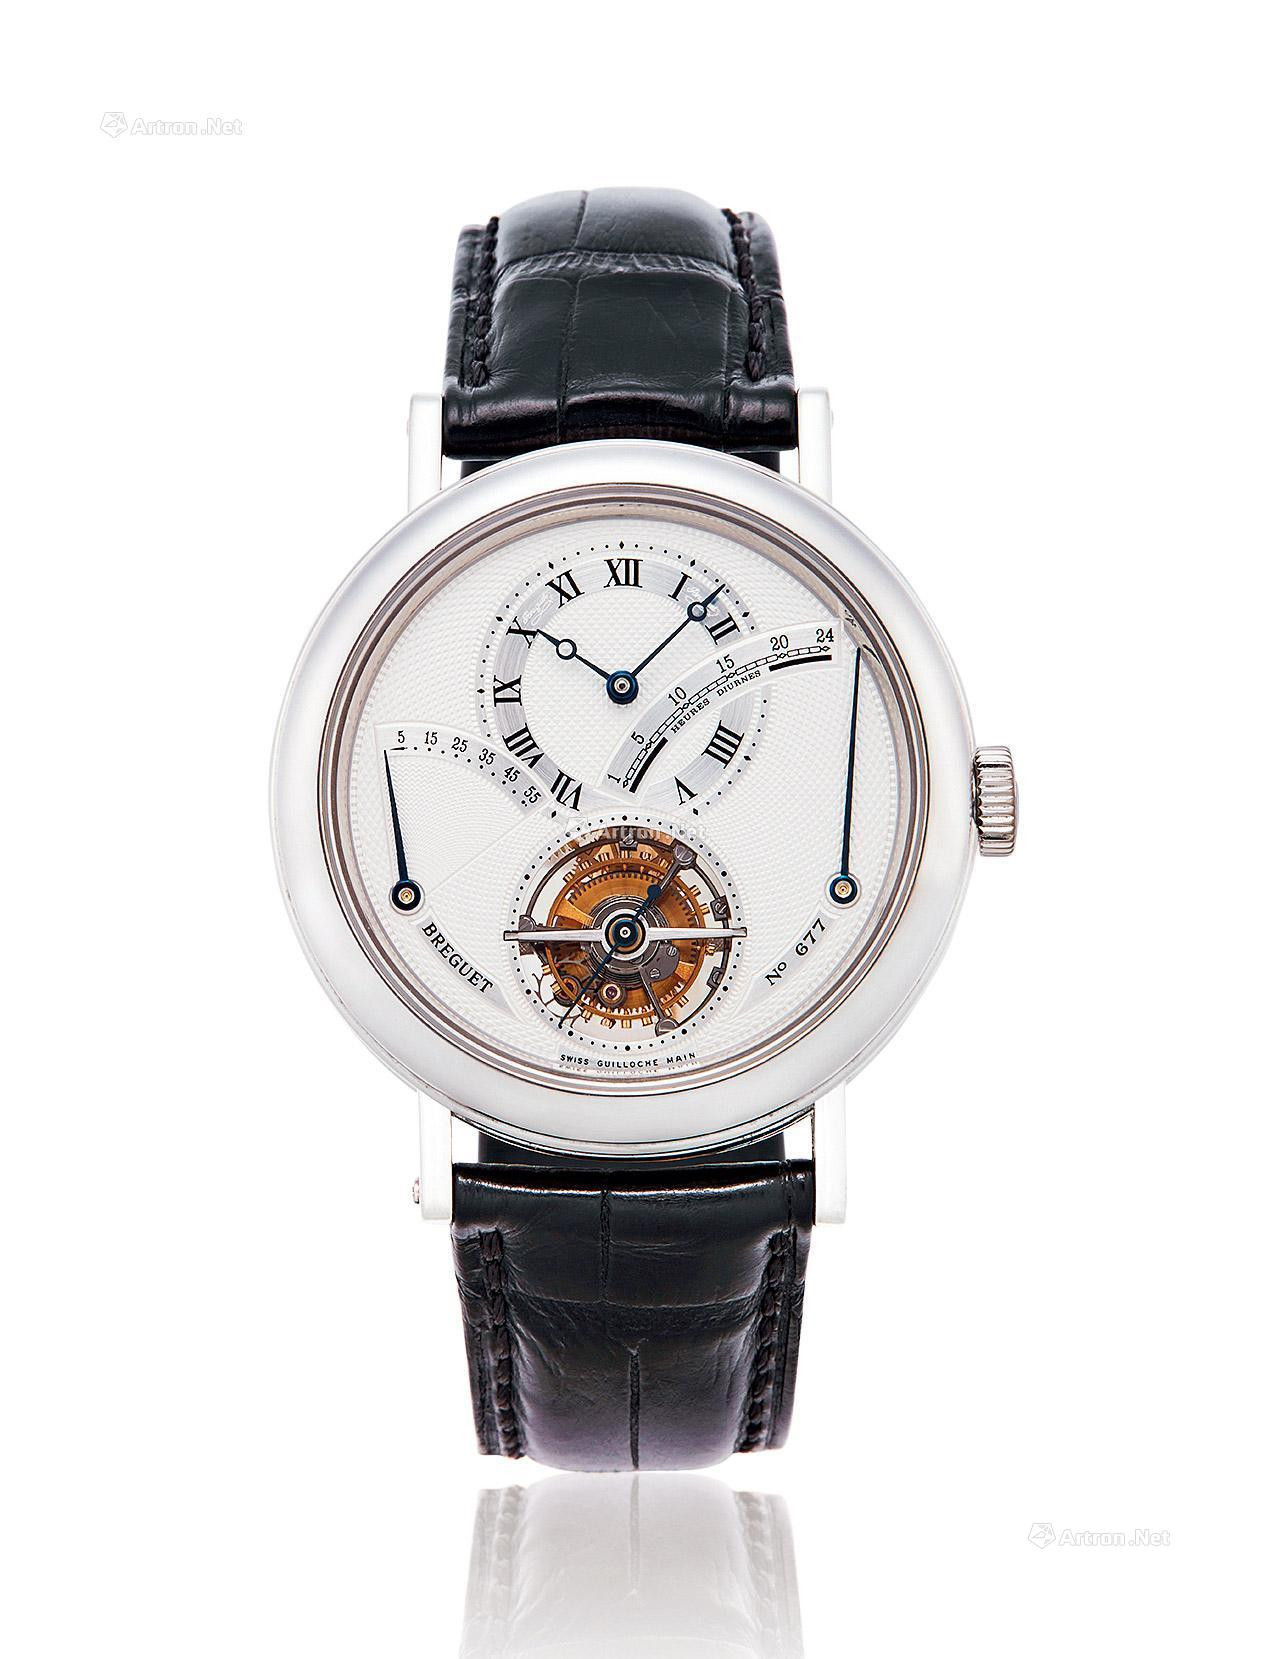 BREGUET A PLATINUM TOURBILLON MANUALLY-WOUND WRISTWATCH WITH POWER-RESERVE AND 24 HOUR INDICATION